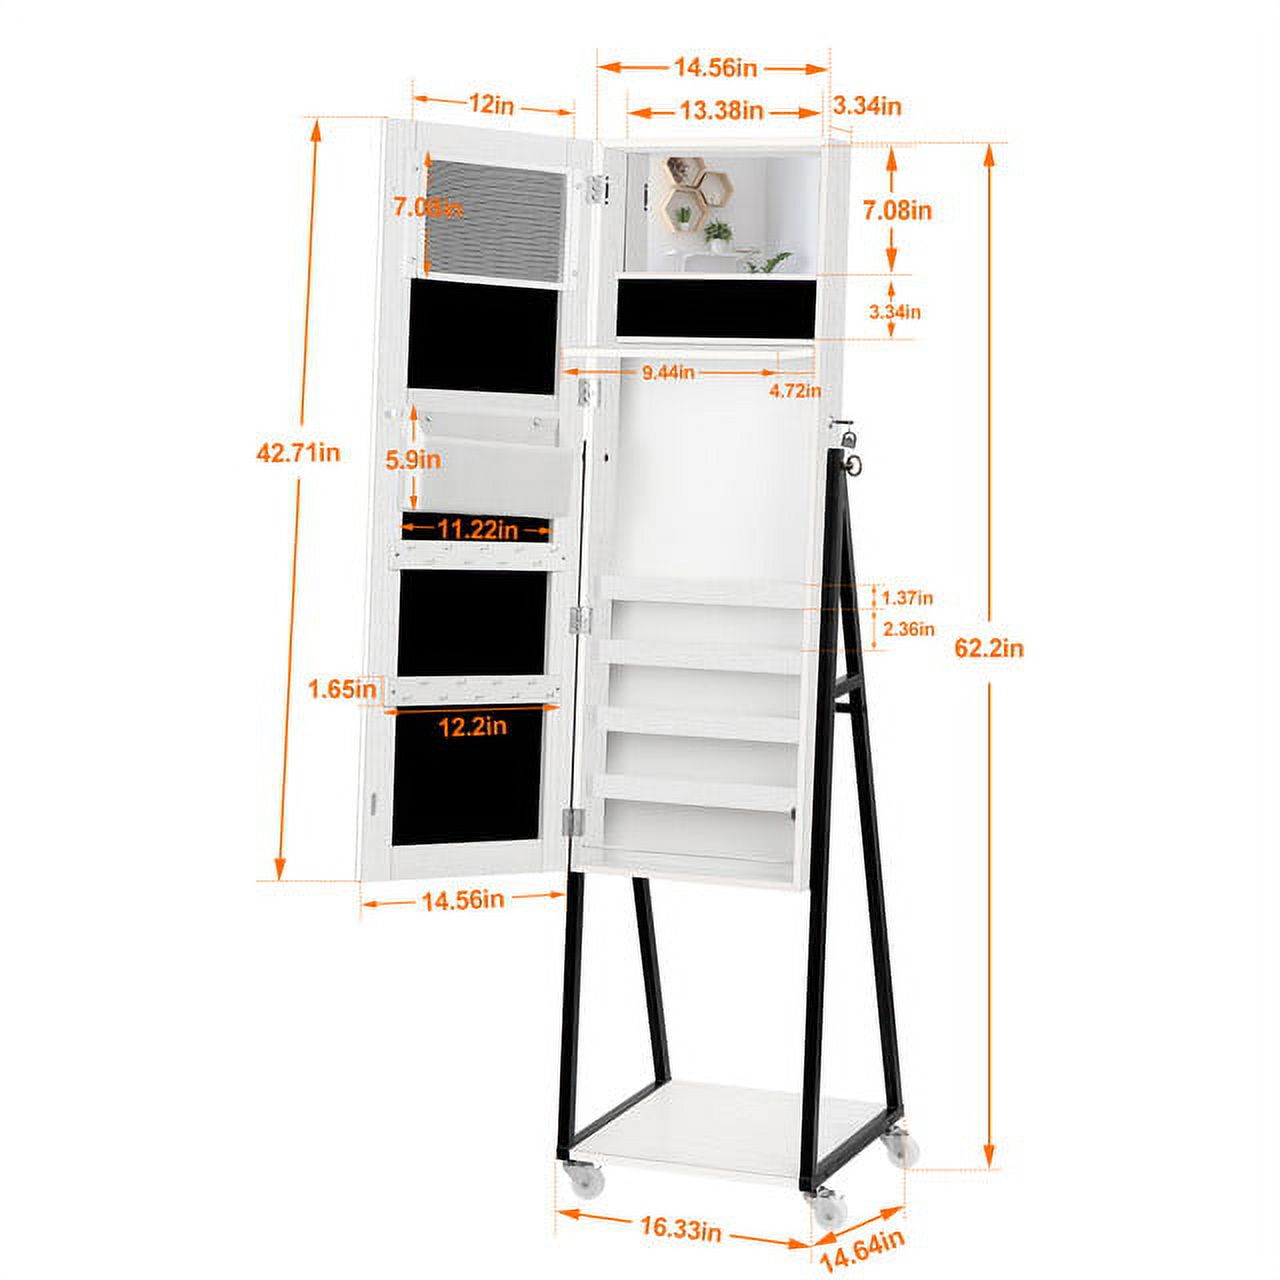 Oumilen Wood Jewelry Armoire on Casters in Pure White - image 2 of 7